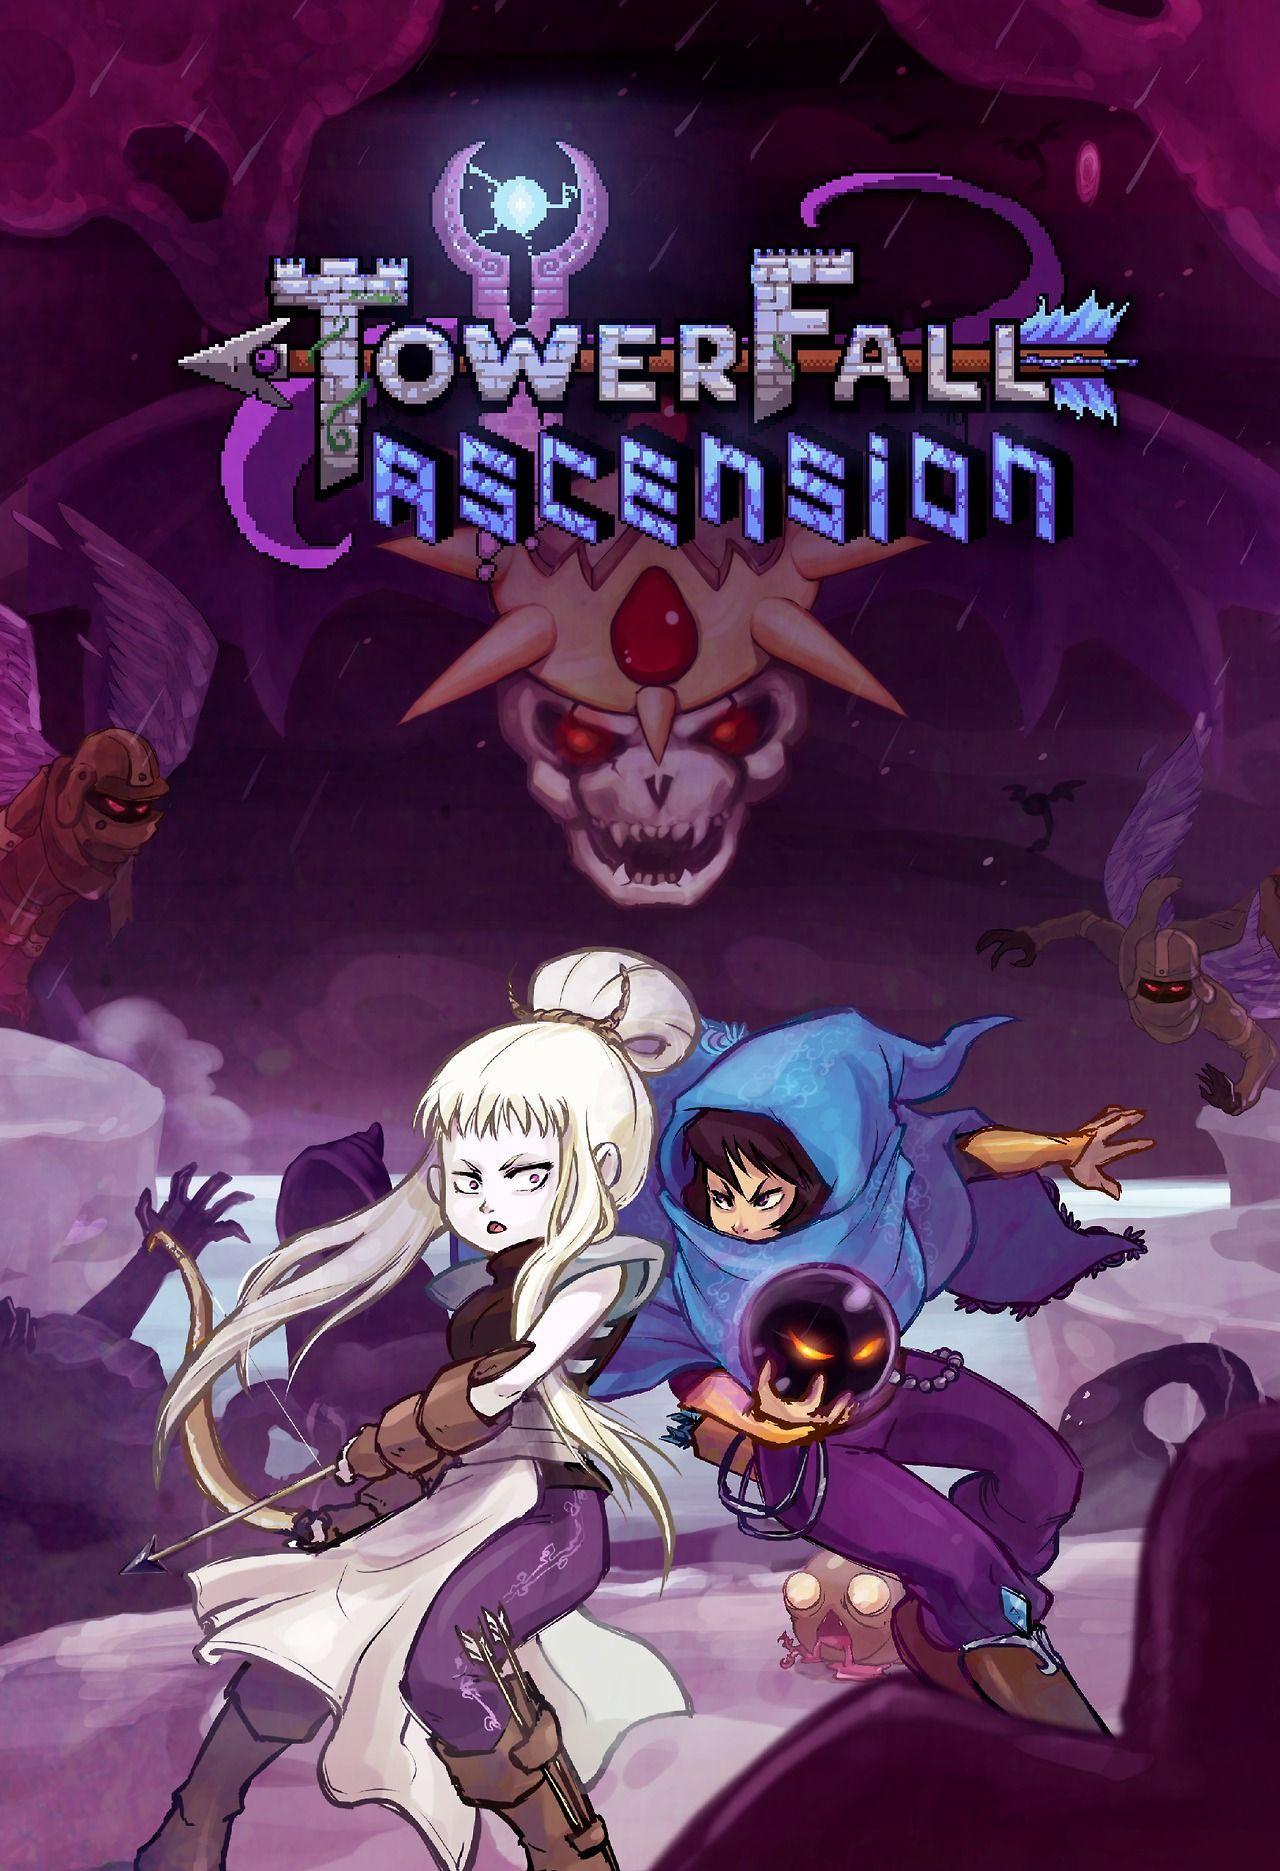 TowerFall: Ascension Poster Art. Art of Towerfall Ascention